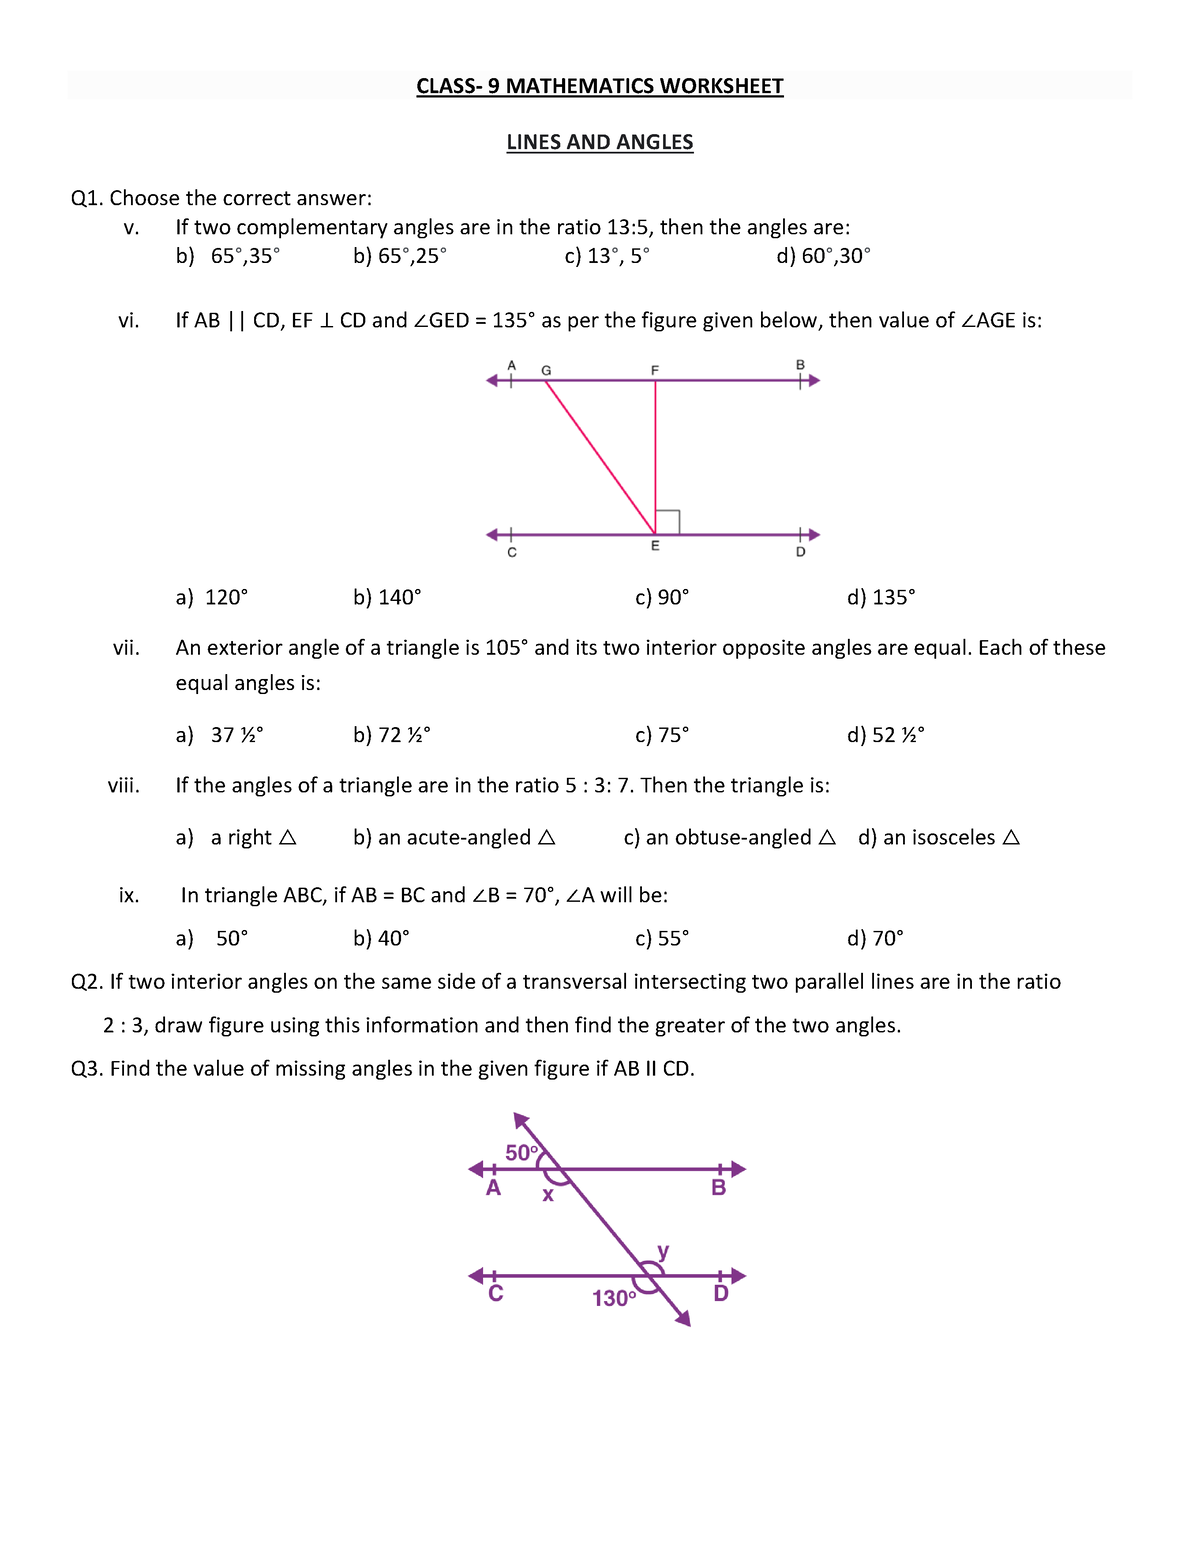 lines and angles assignment class 9